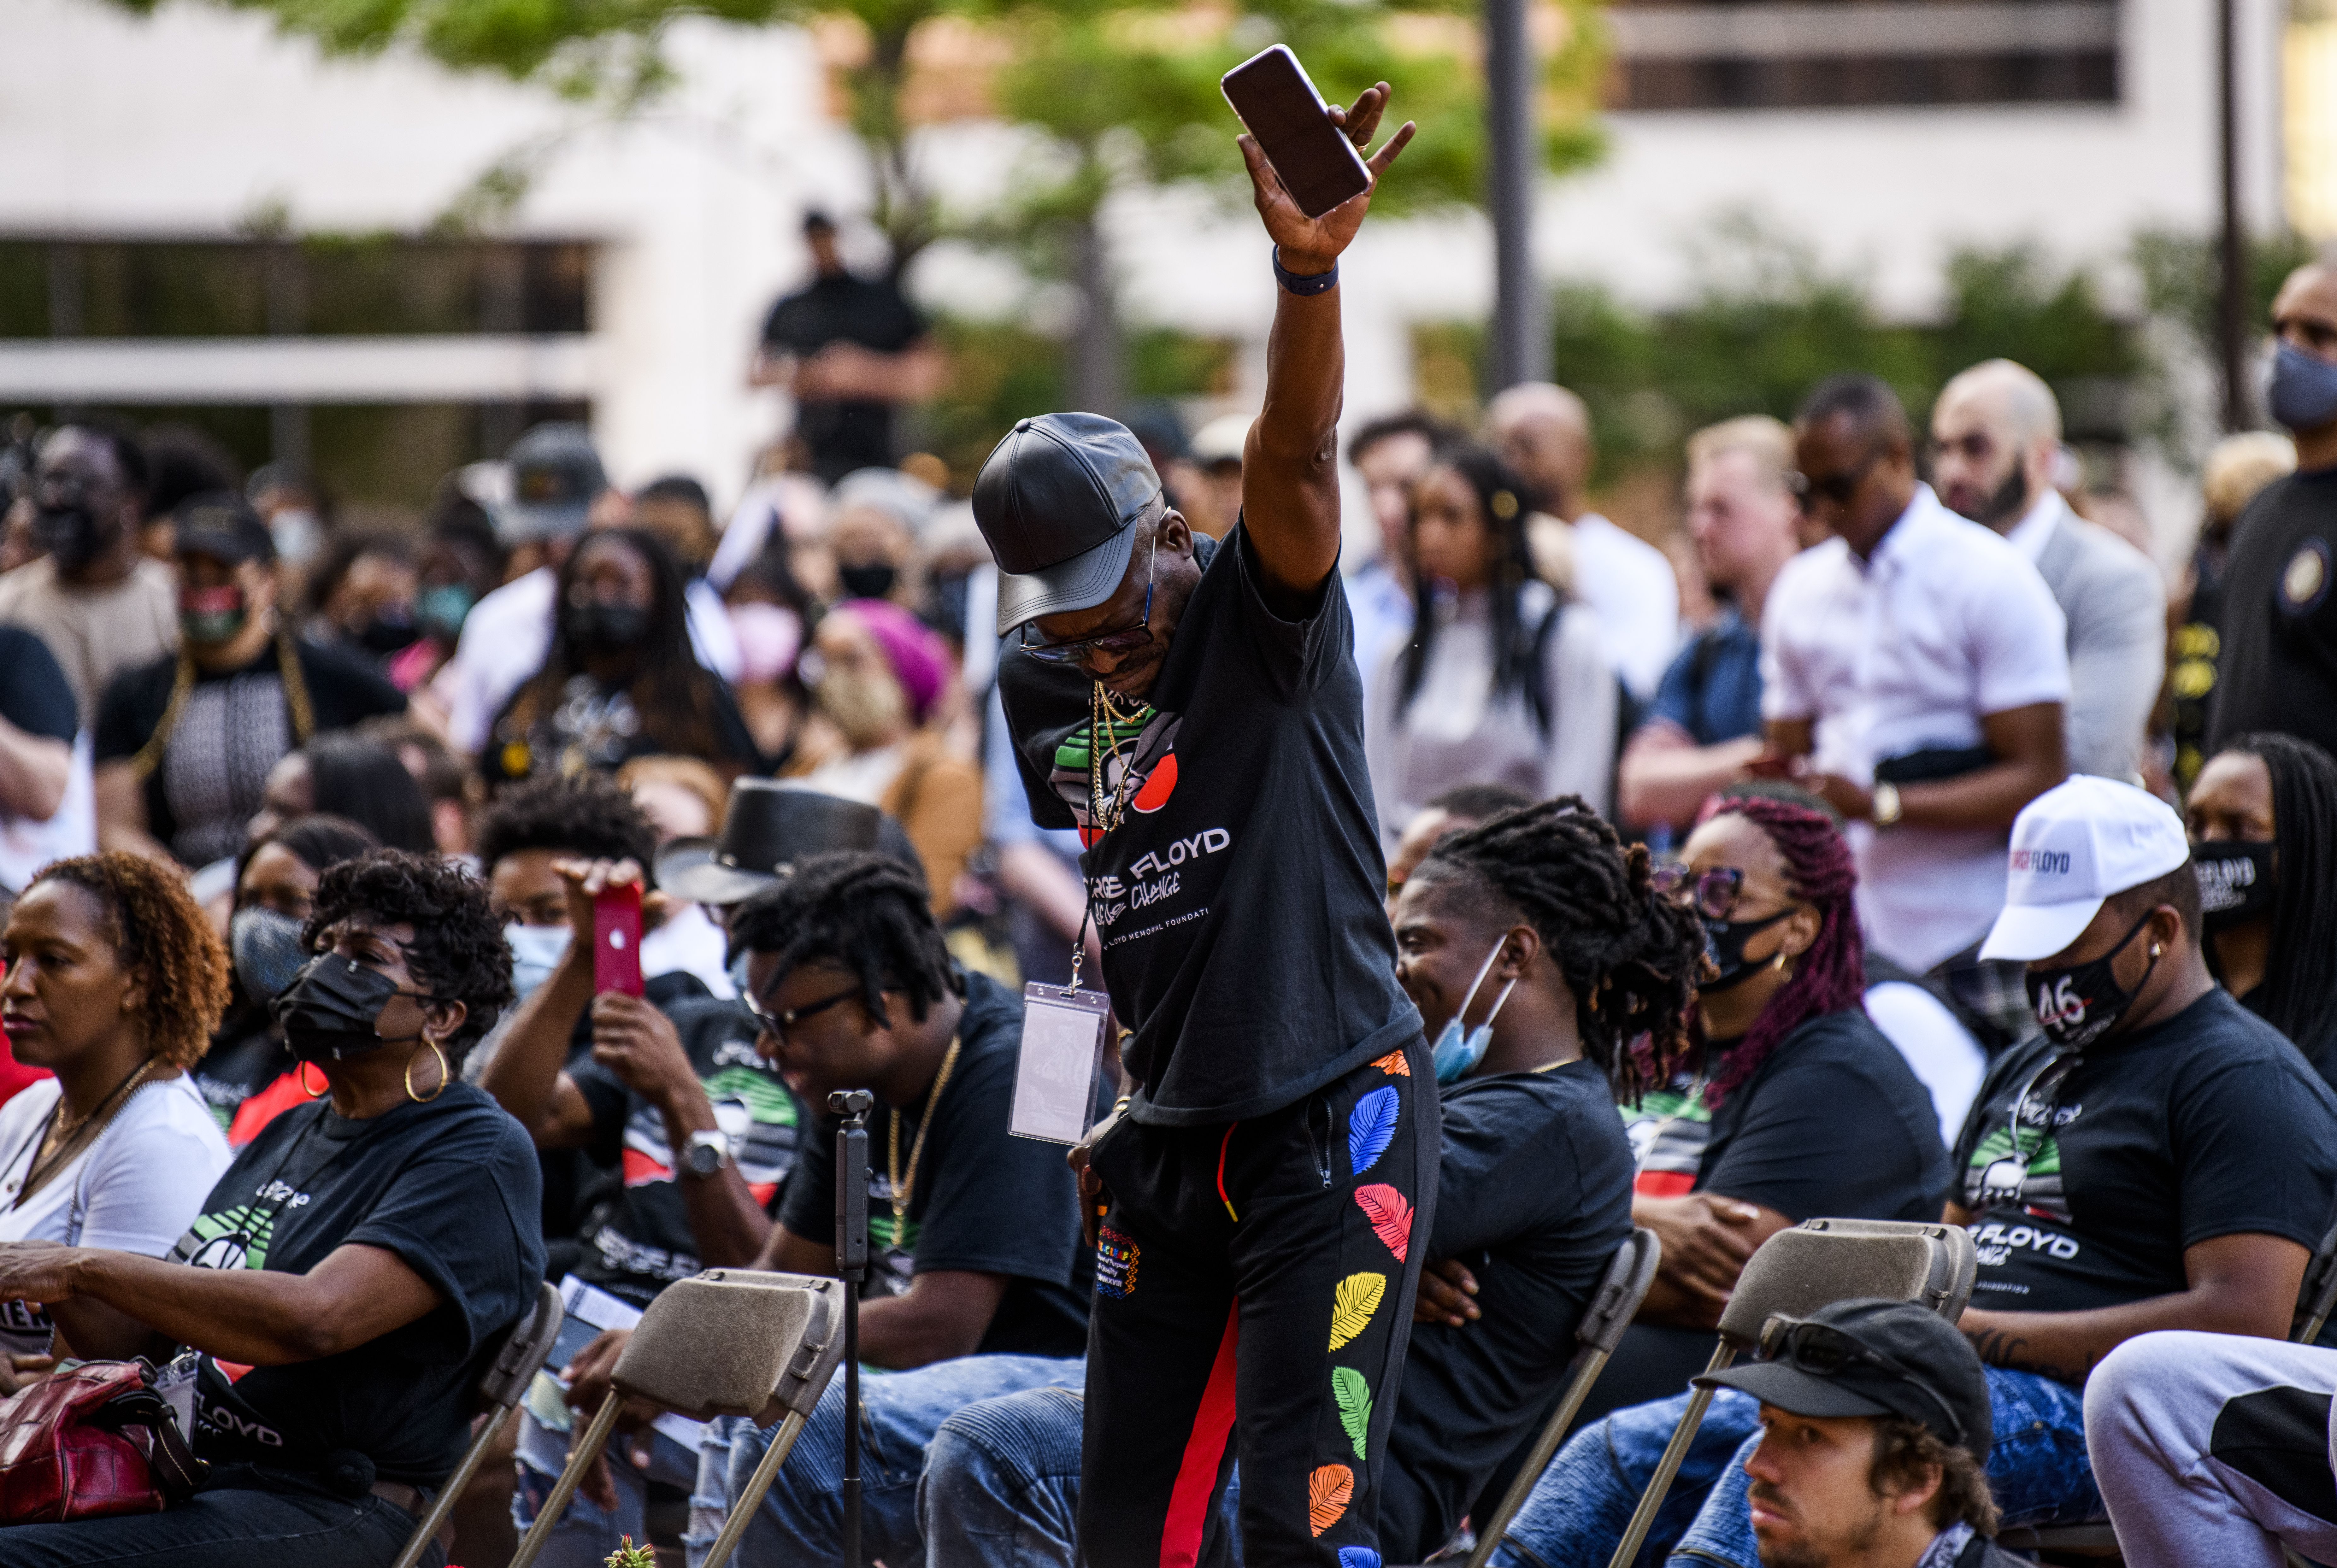  A man reacts as pastor Carmen Means speaks to a group gathered outside the Hennepin County Government Center on May 23, 2021 in Minneapolis, Minnesota.